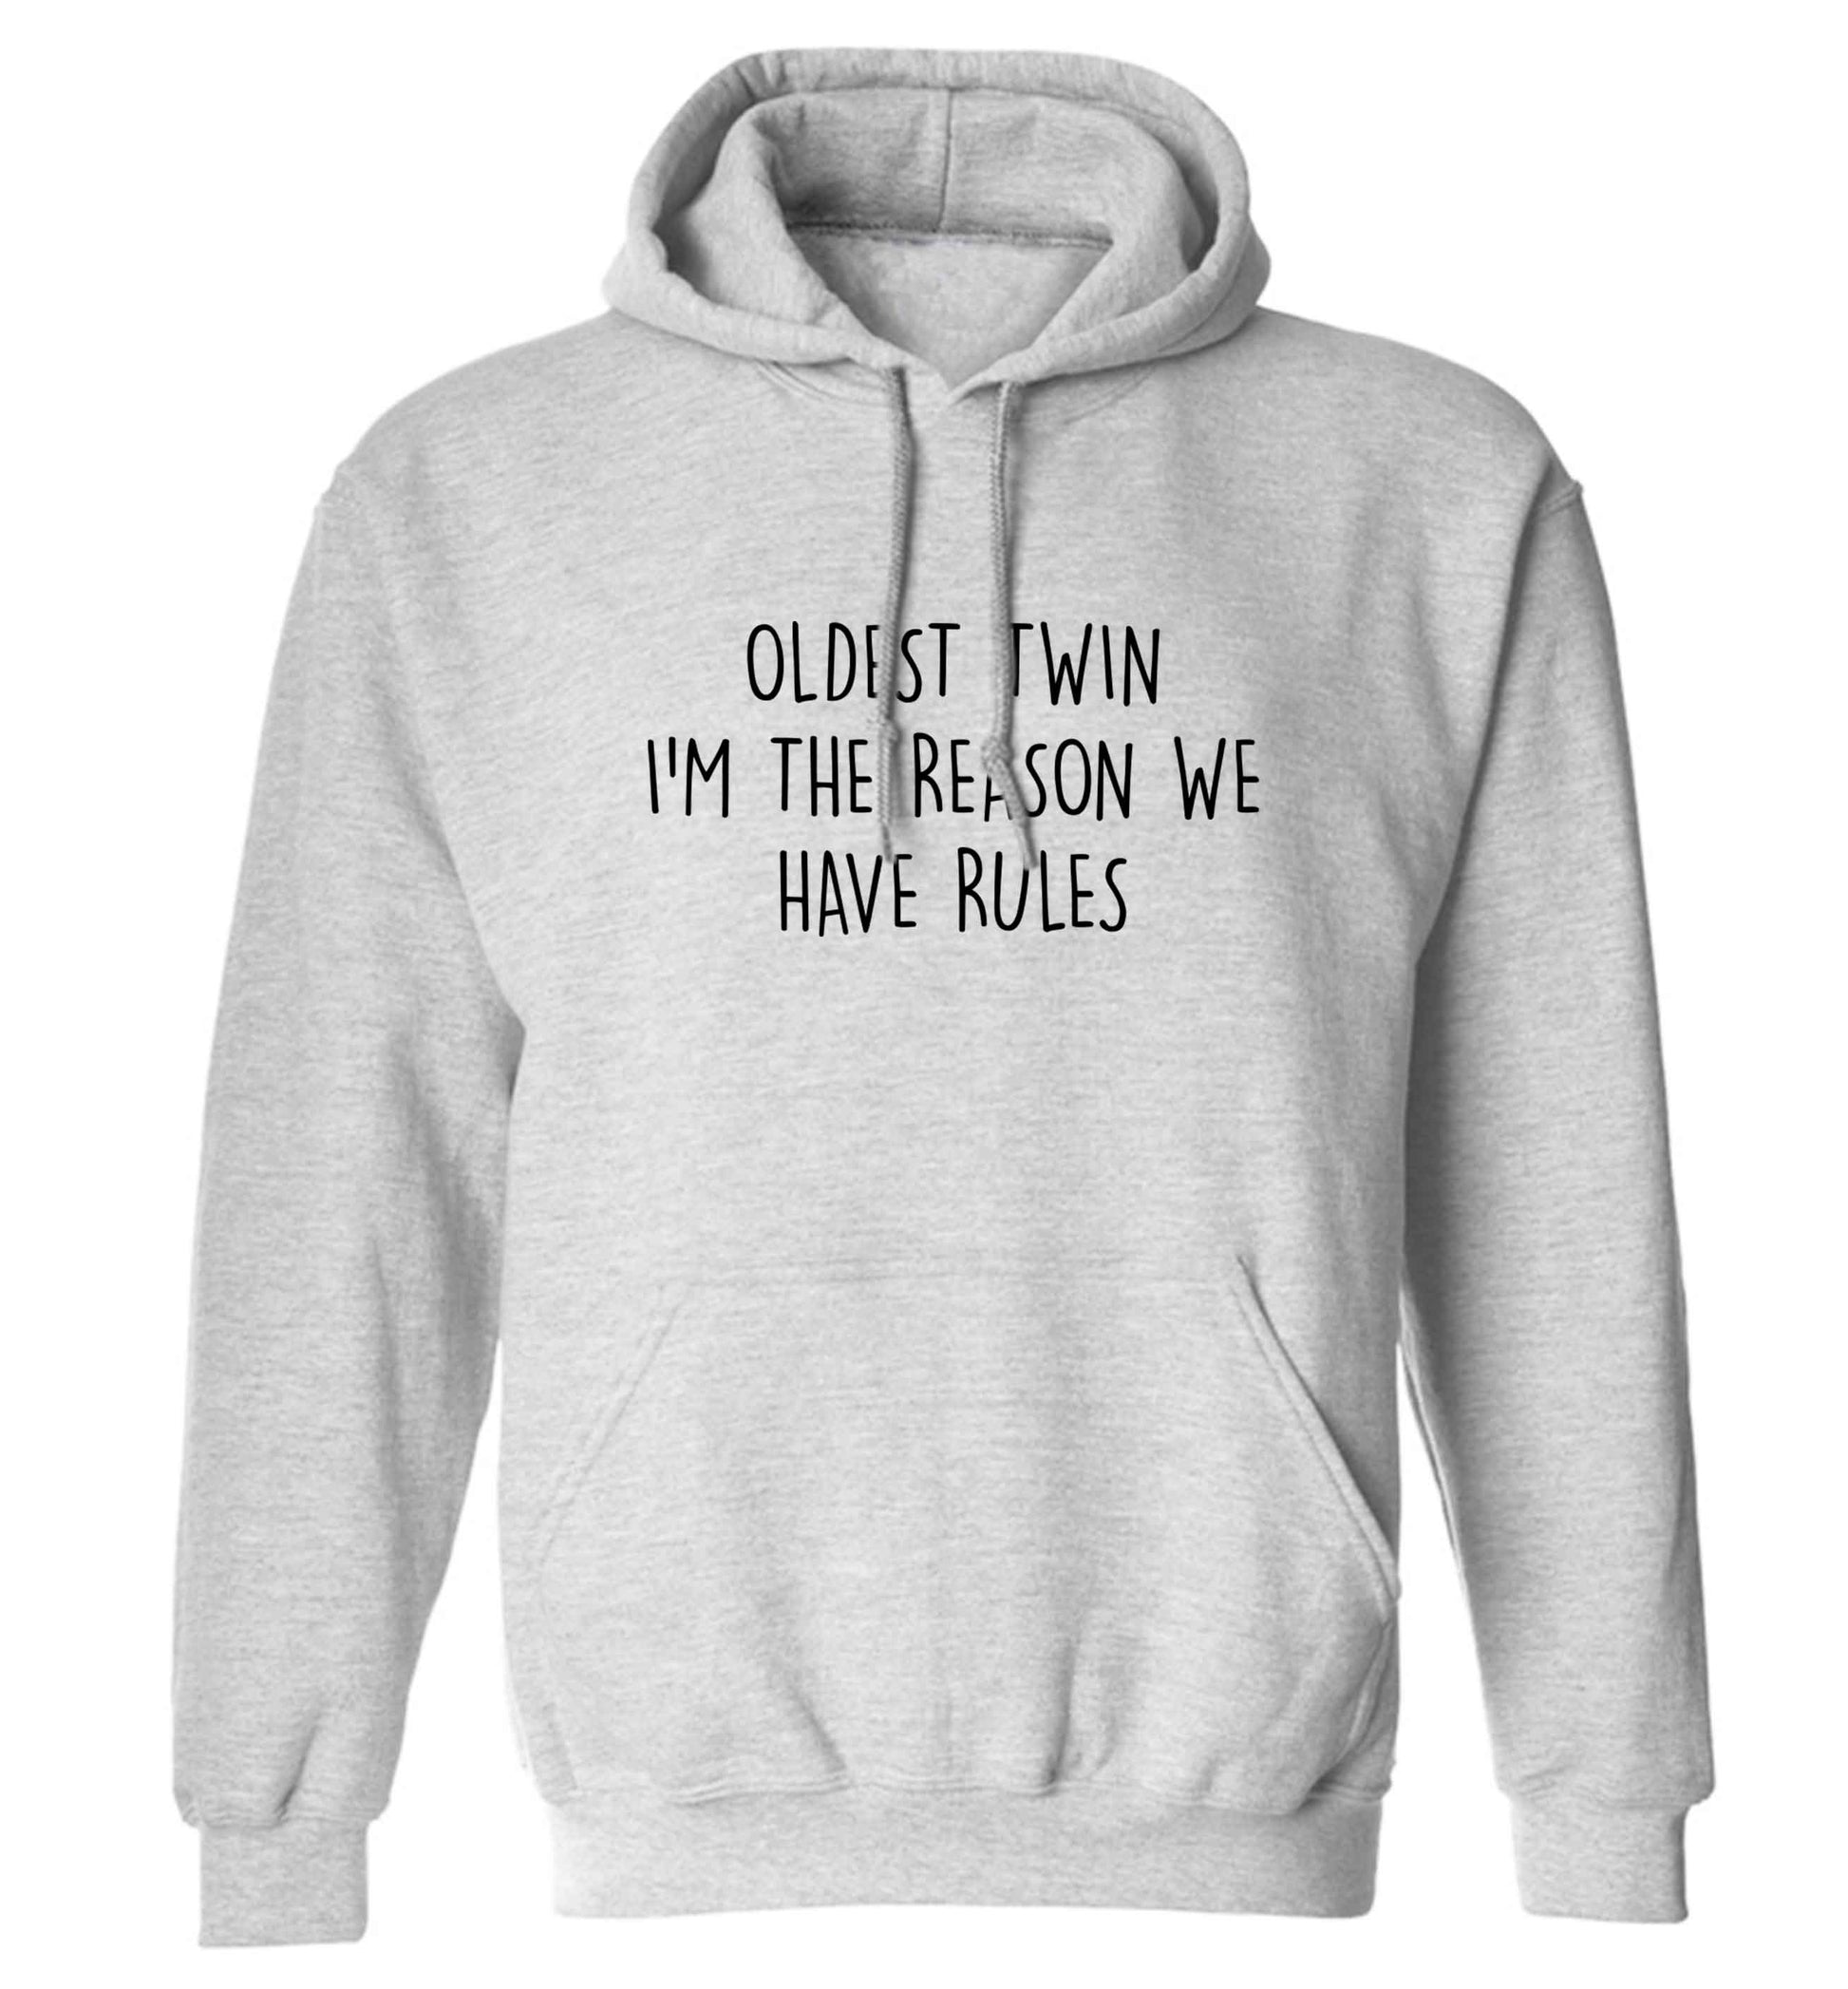 Oldest twin I'm the reason we have rules adults unisex grey hoodie 2XL